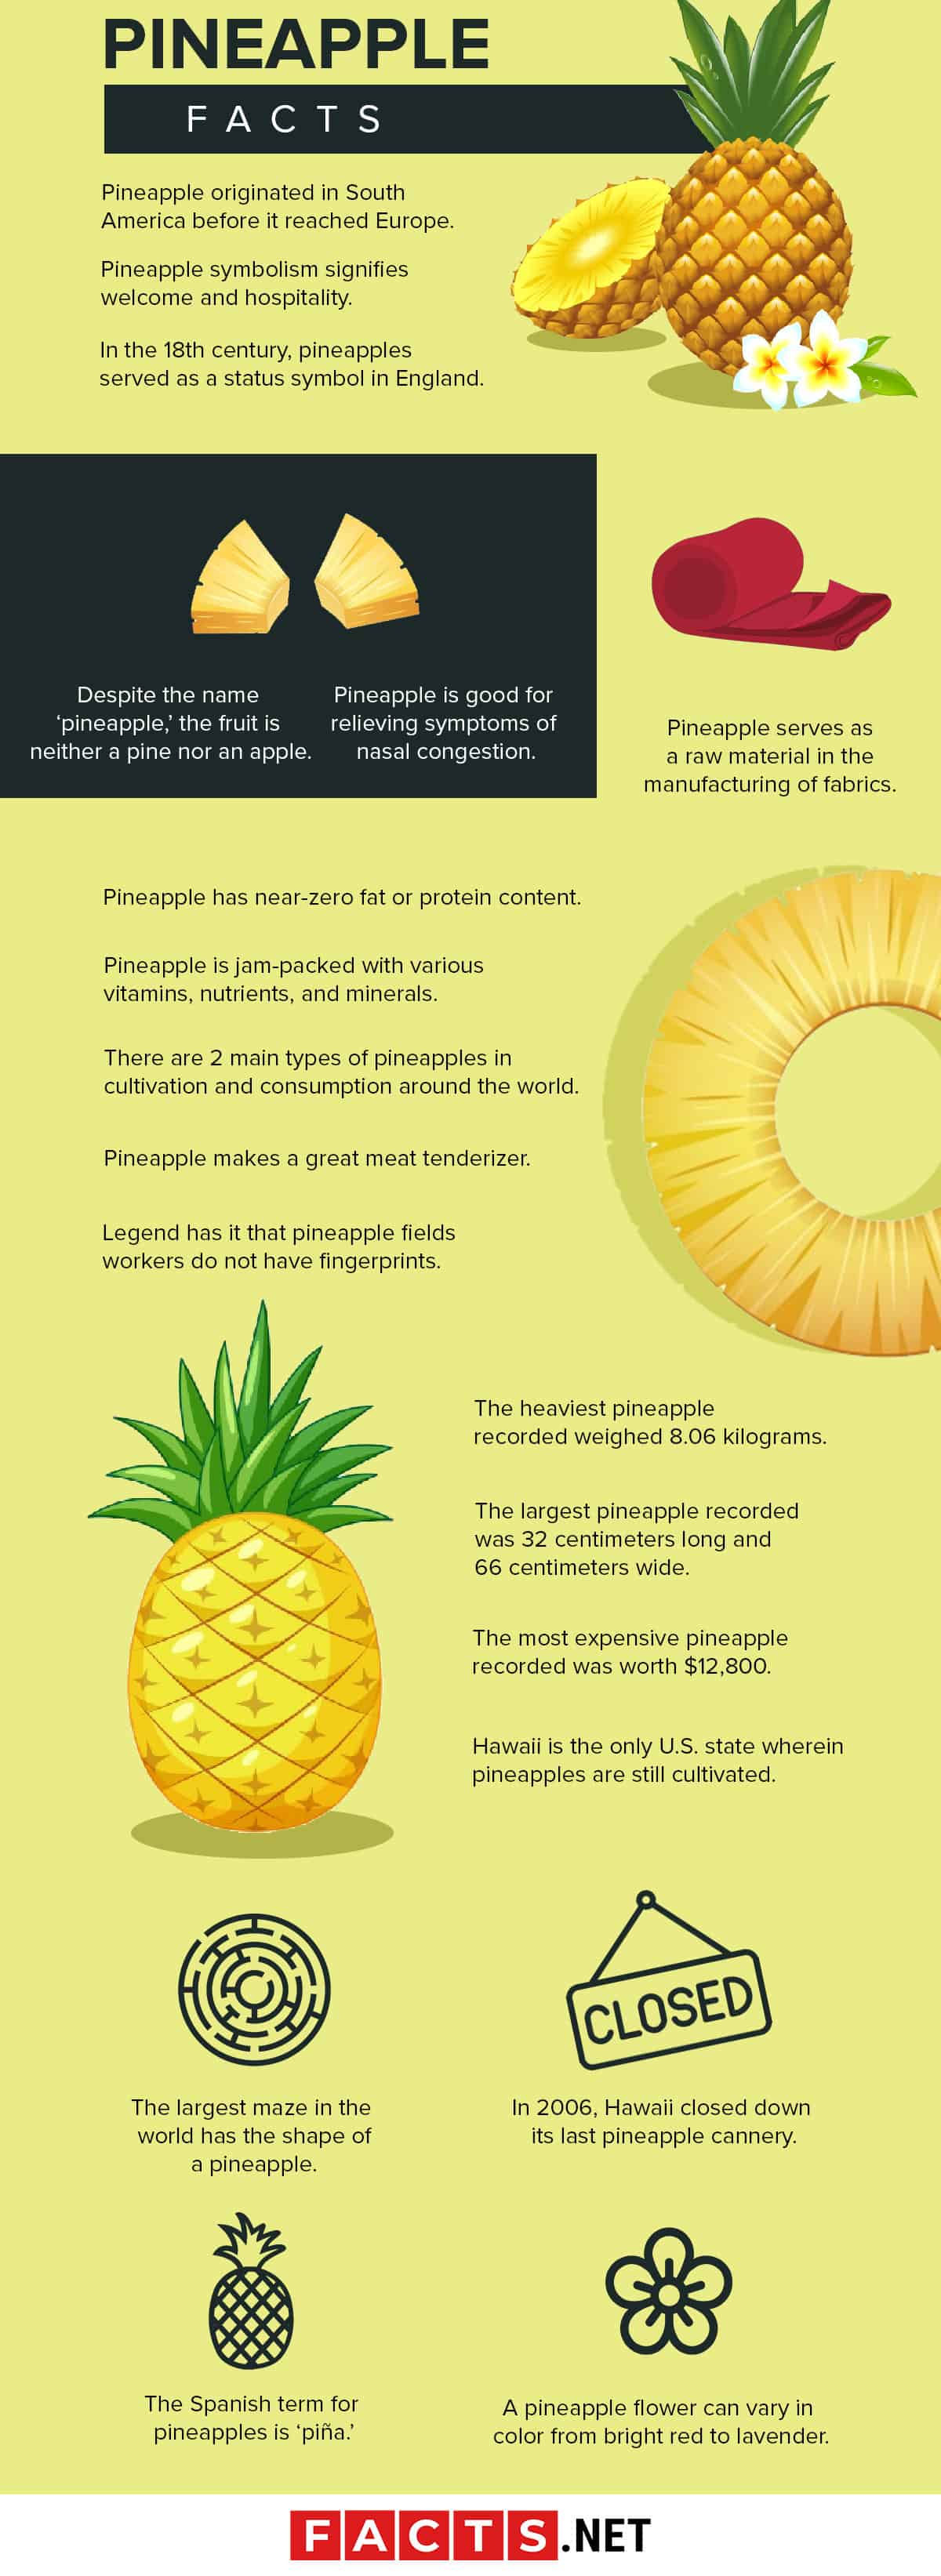 Pineapple Facts